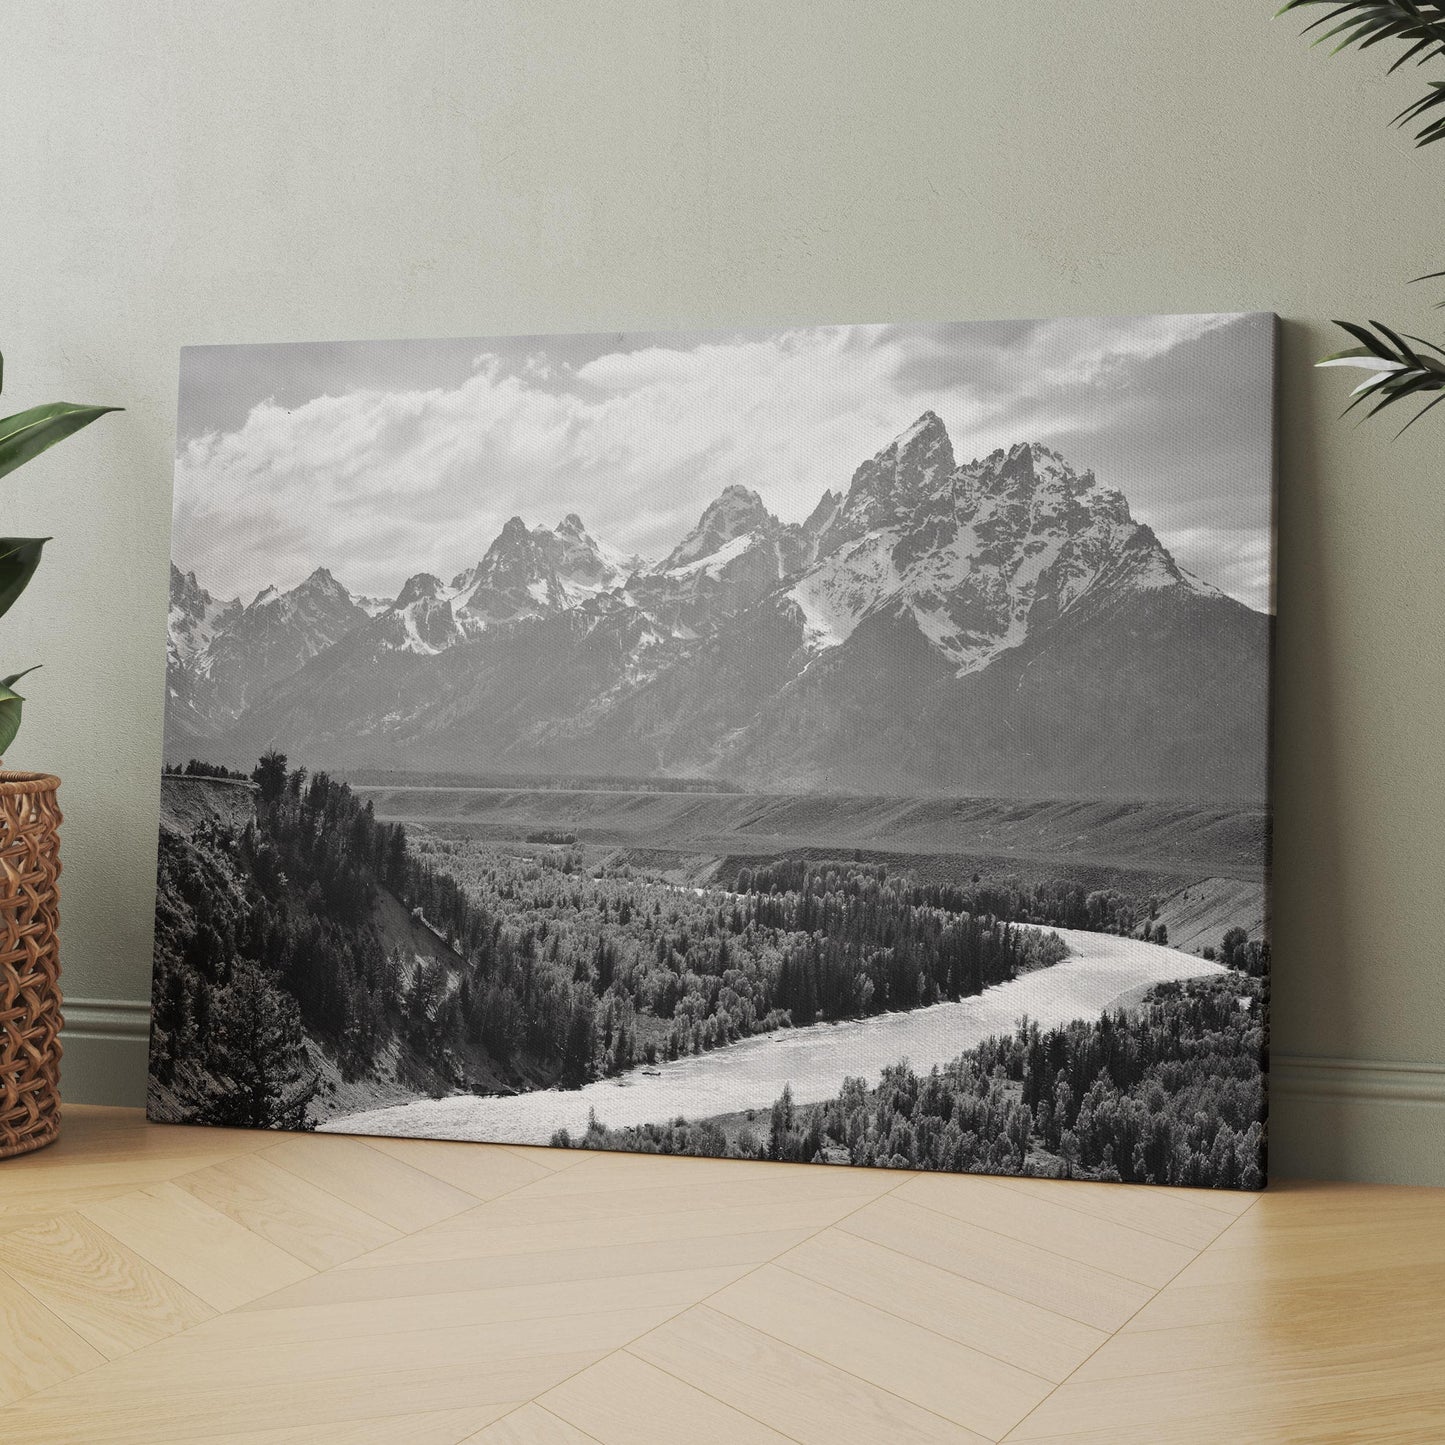 Ansel Adams, The Tetons and the Snake River in Grand Teton National Park